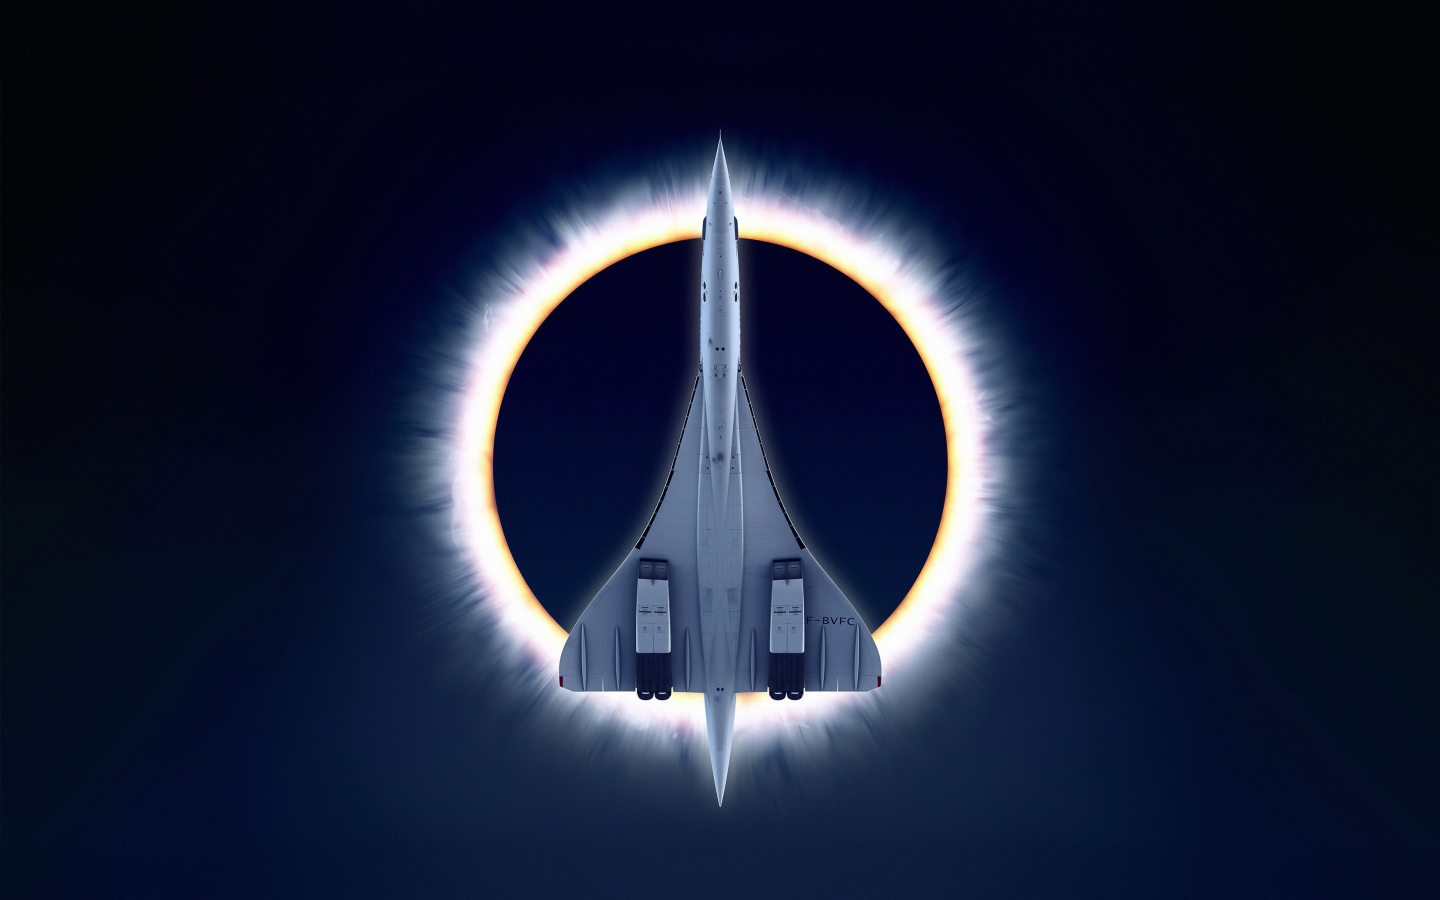 Concorde Carre, eclipse, airplane, moon, aircraft, 1440x900 wallpaper